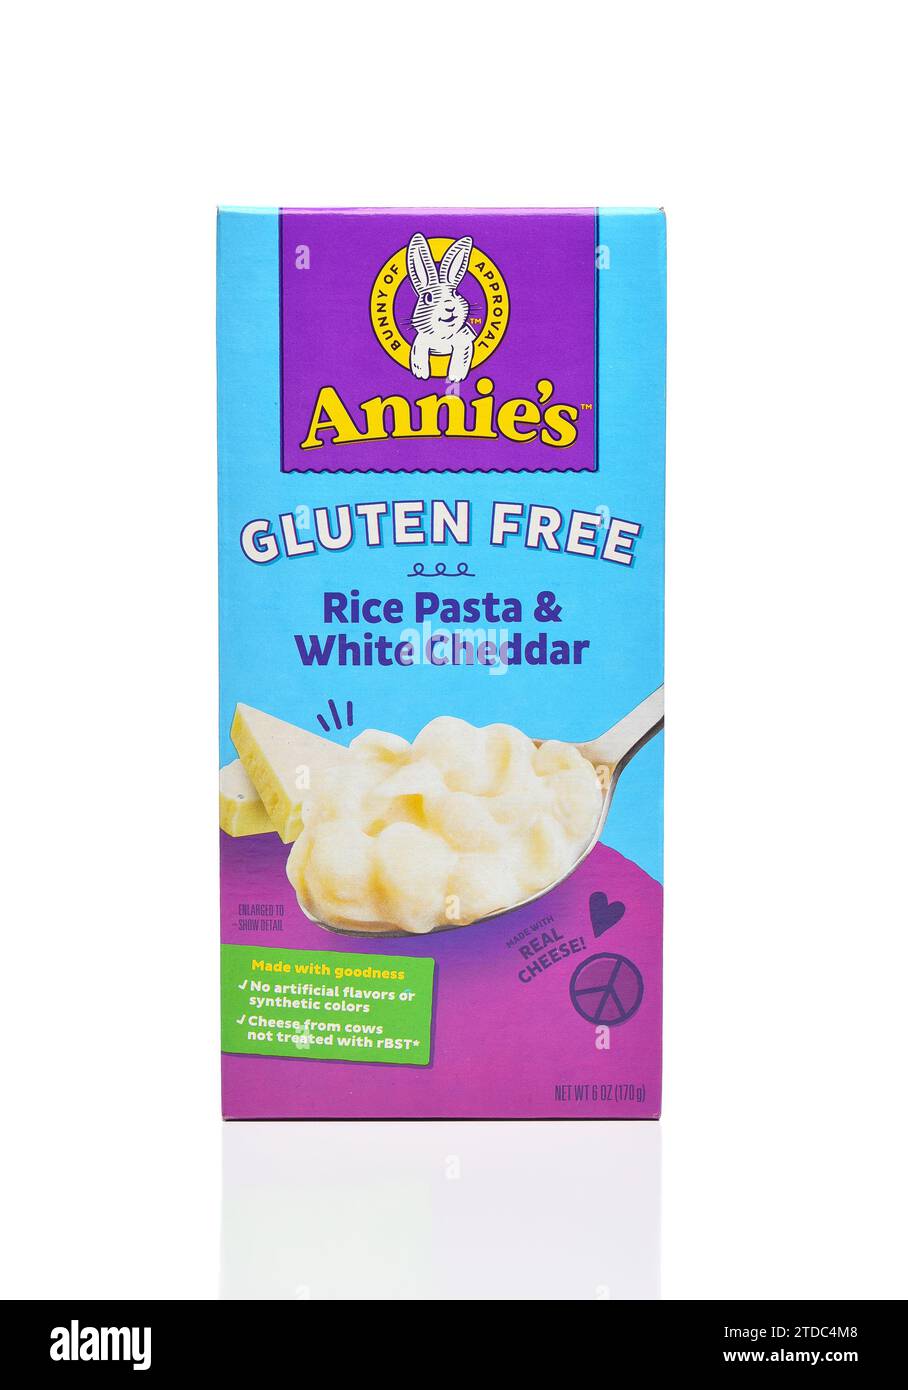 IRVINE, CALIFORNIA - 13 DEC 2023: A box of Annies Gluten Free Rice Pasta and White Cheddar. Stock Photo